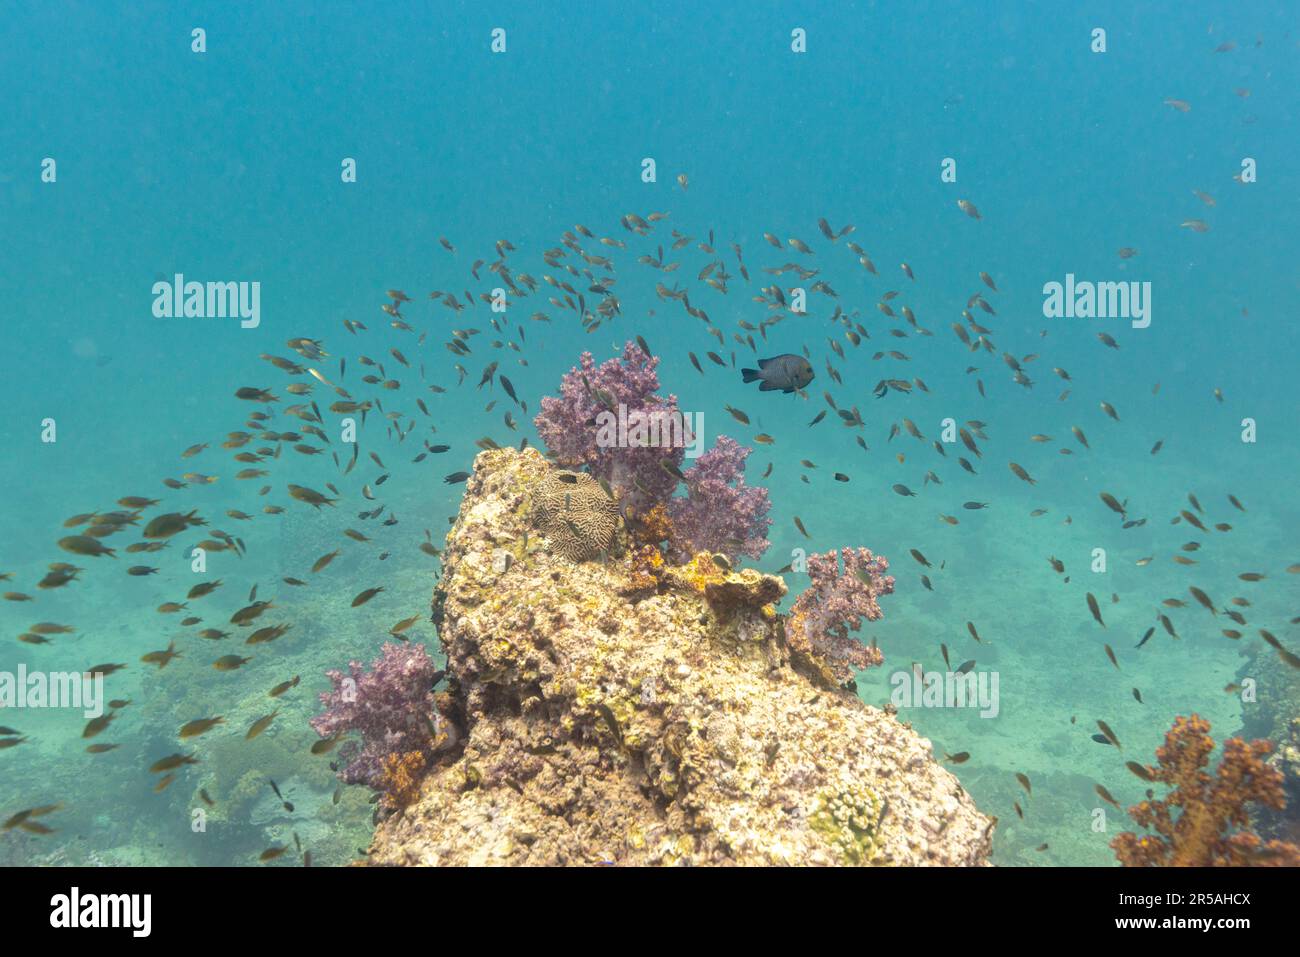 A beautiful colourful underwater reef scene with corals and reef fish. Muscat, Oman. Stock Photo